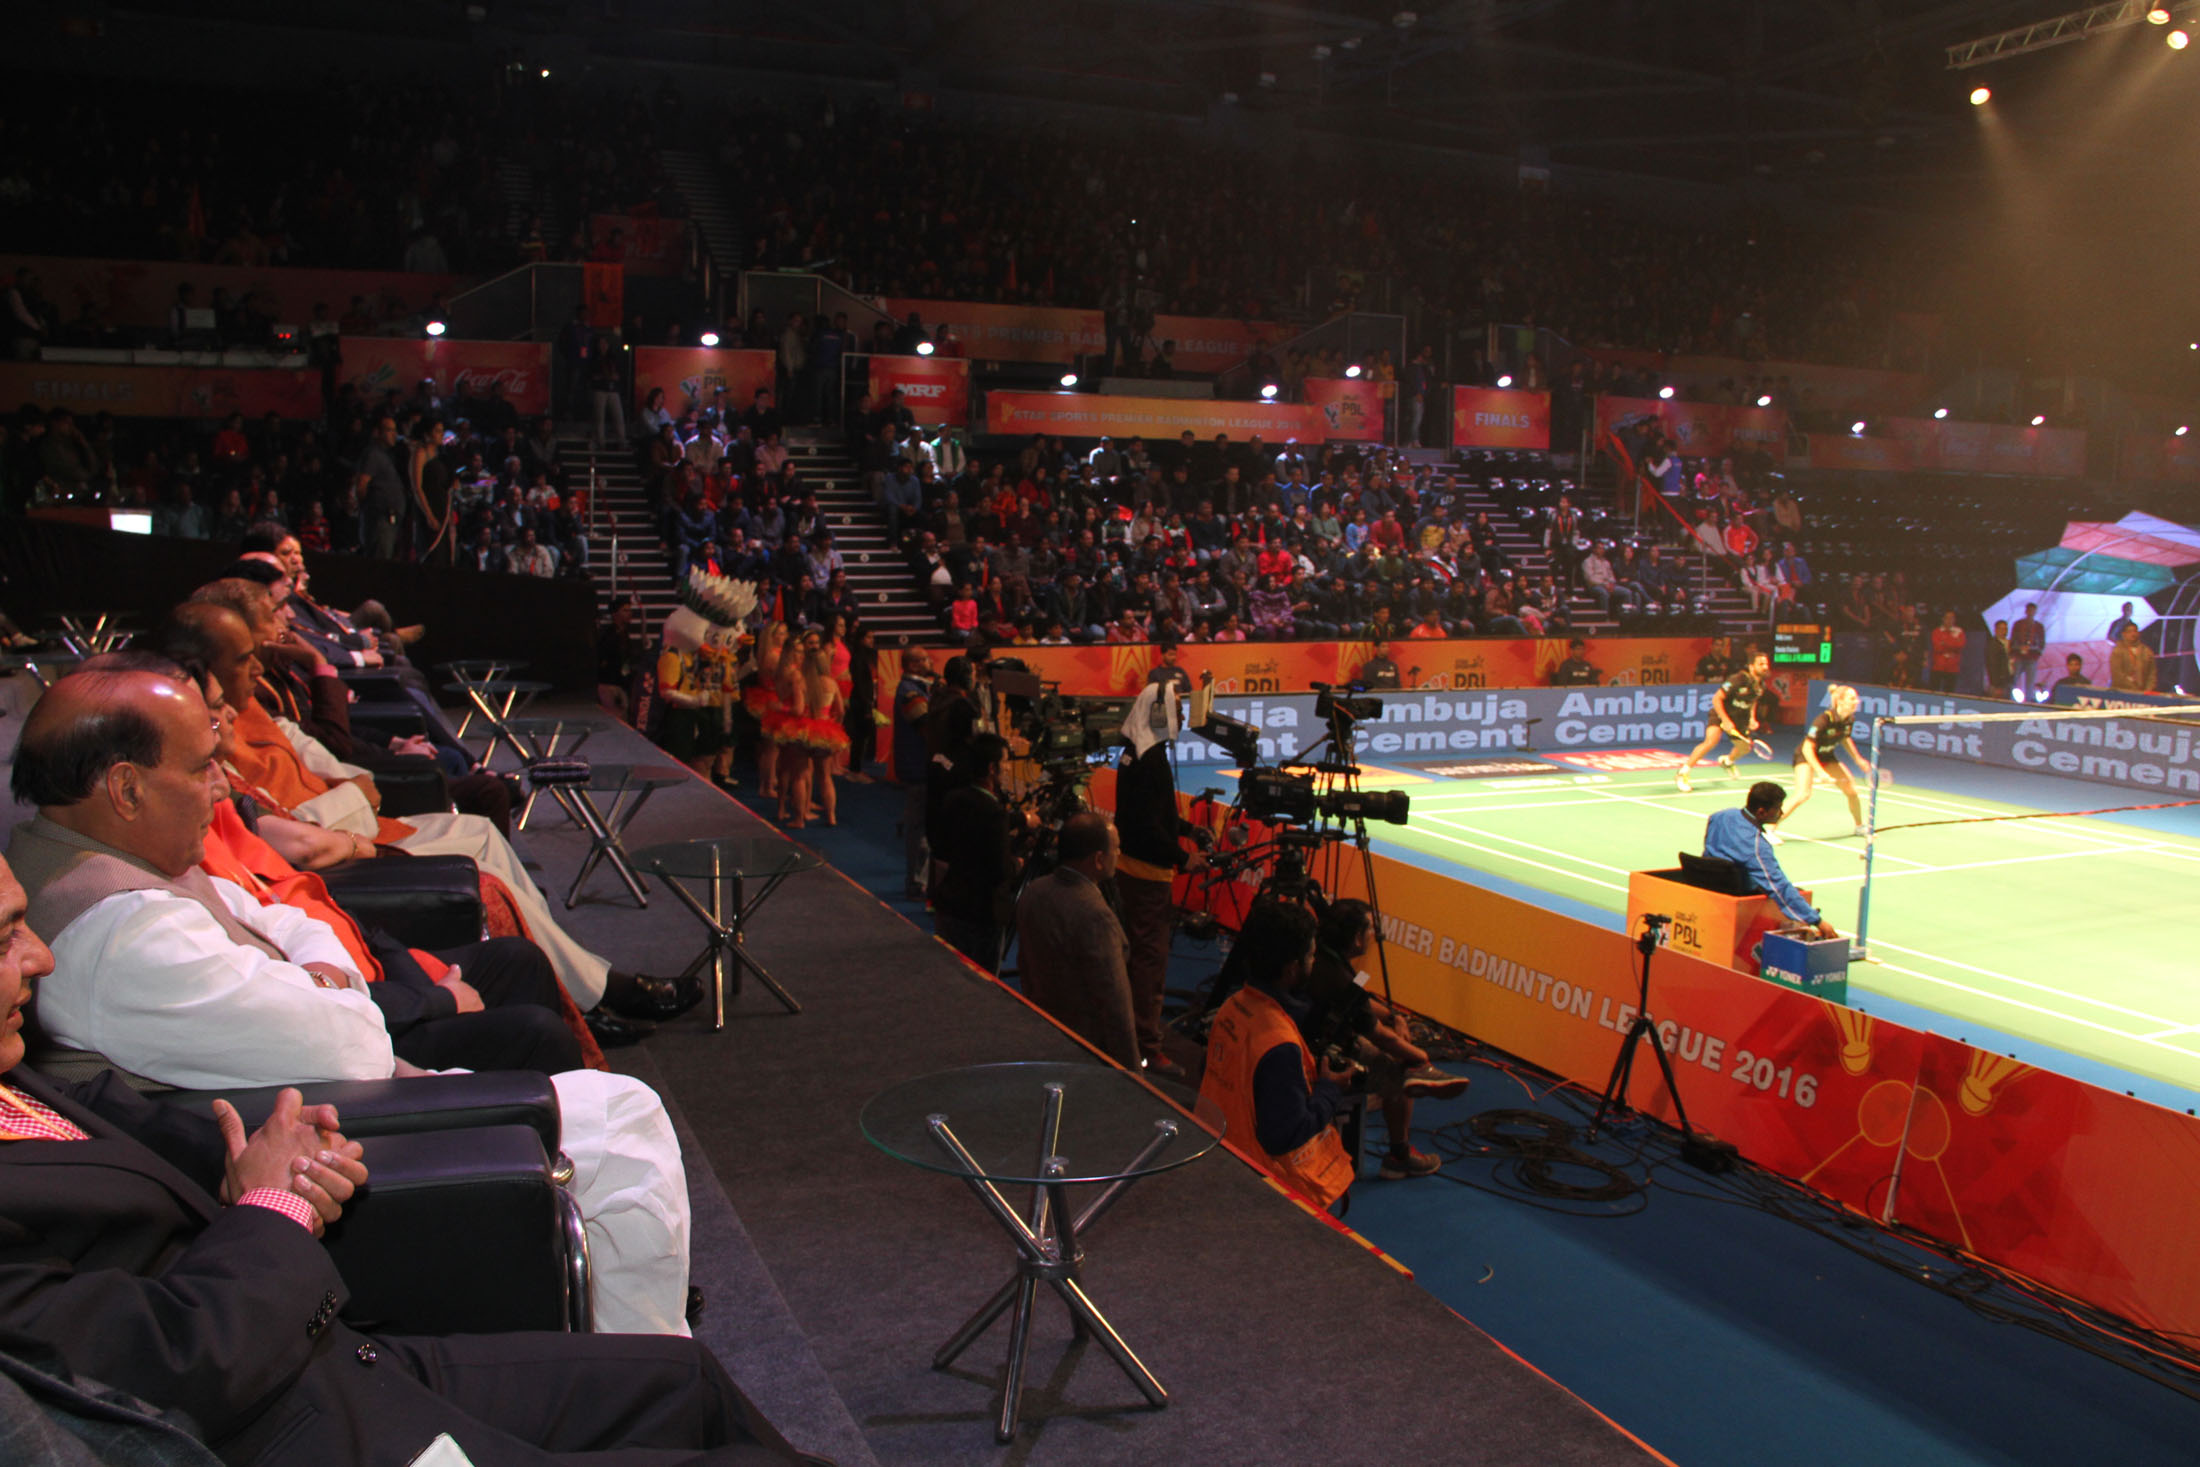 The Union Home Minister, Shri Rajnath Singh watching a match during the final day of the Premier Badminton League, in New Delhi on January 17, 2016.